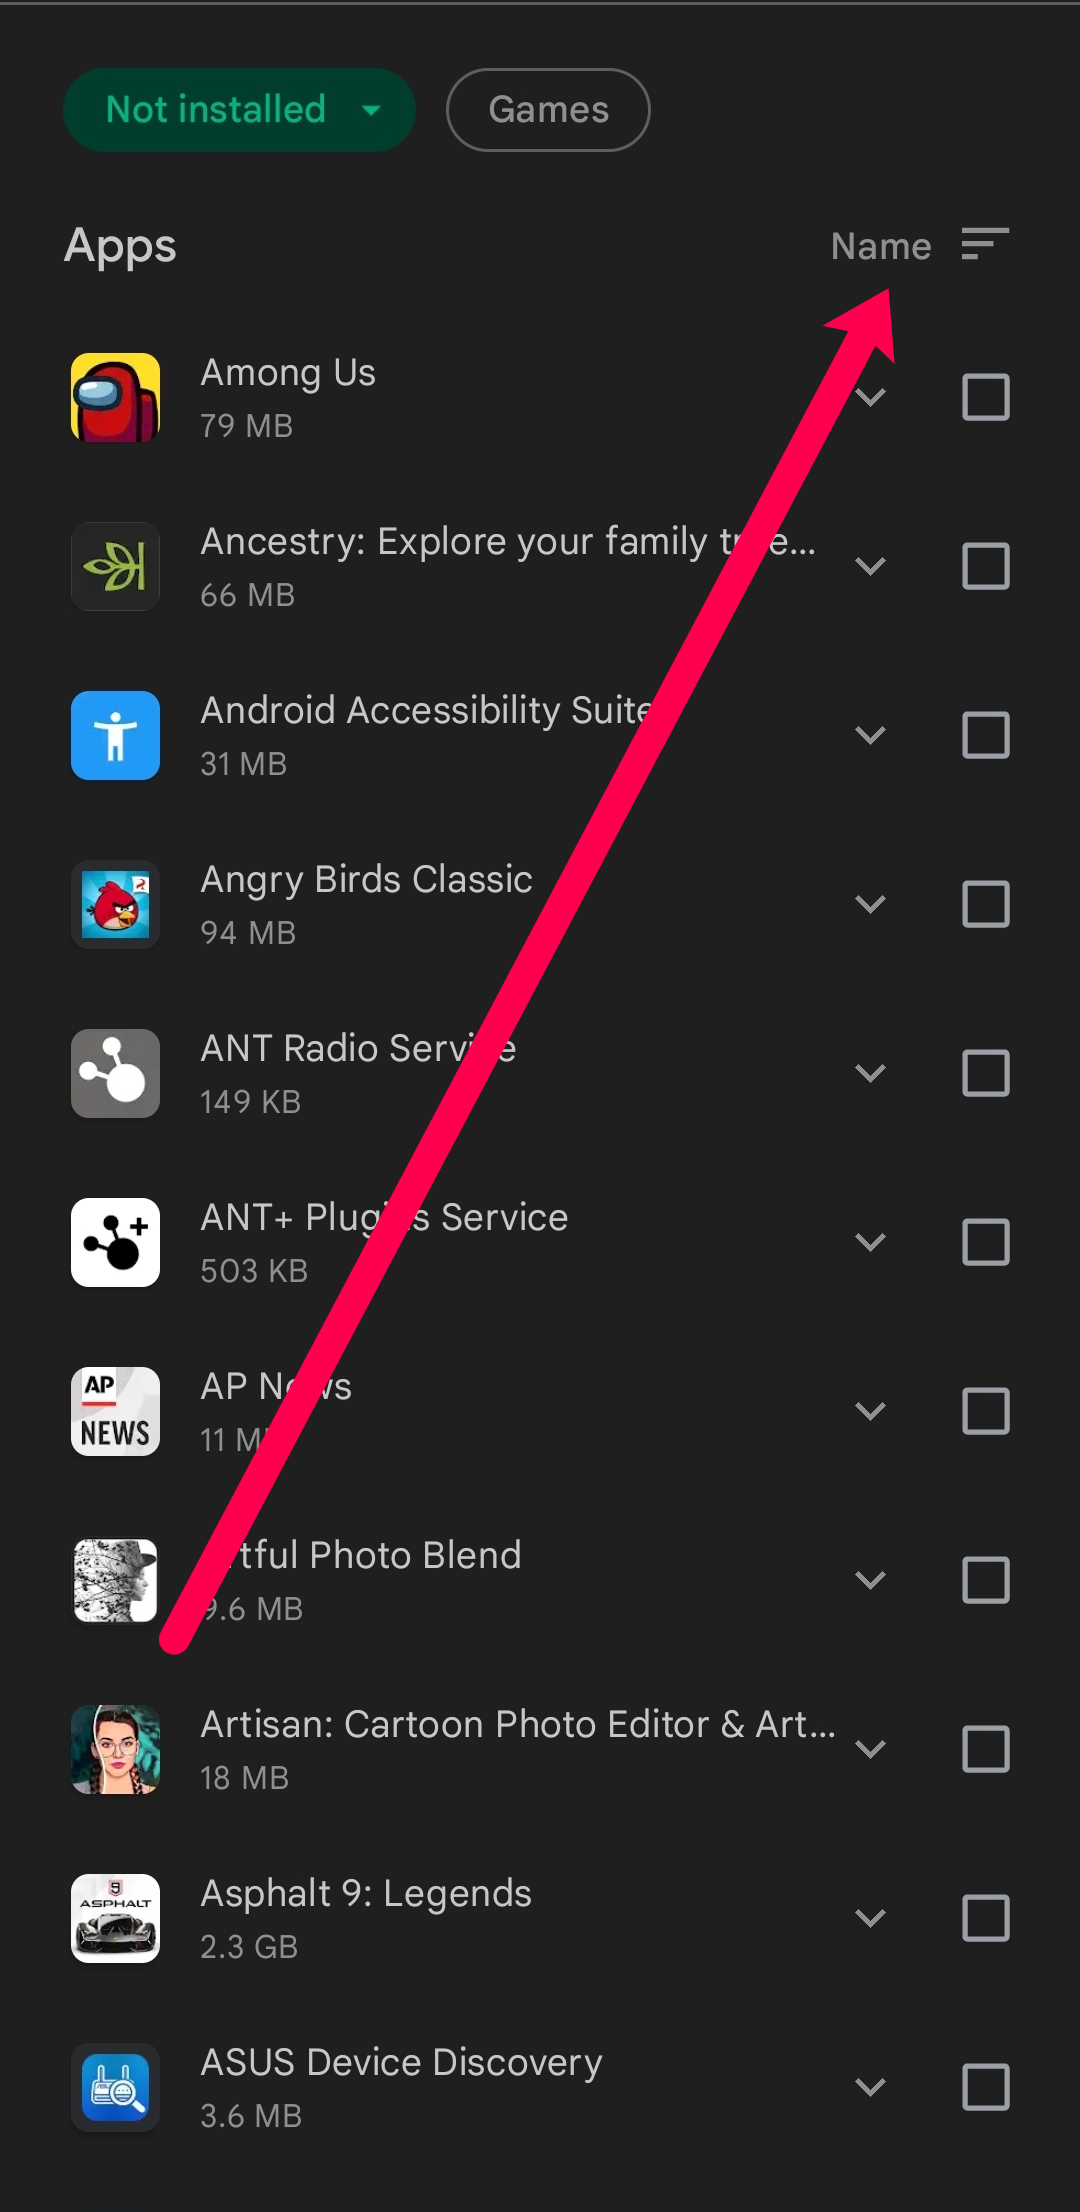 How do I get deleted apps?